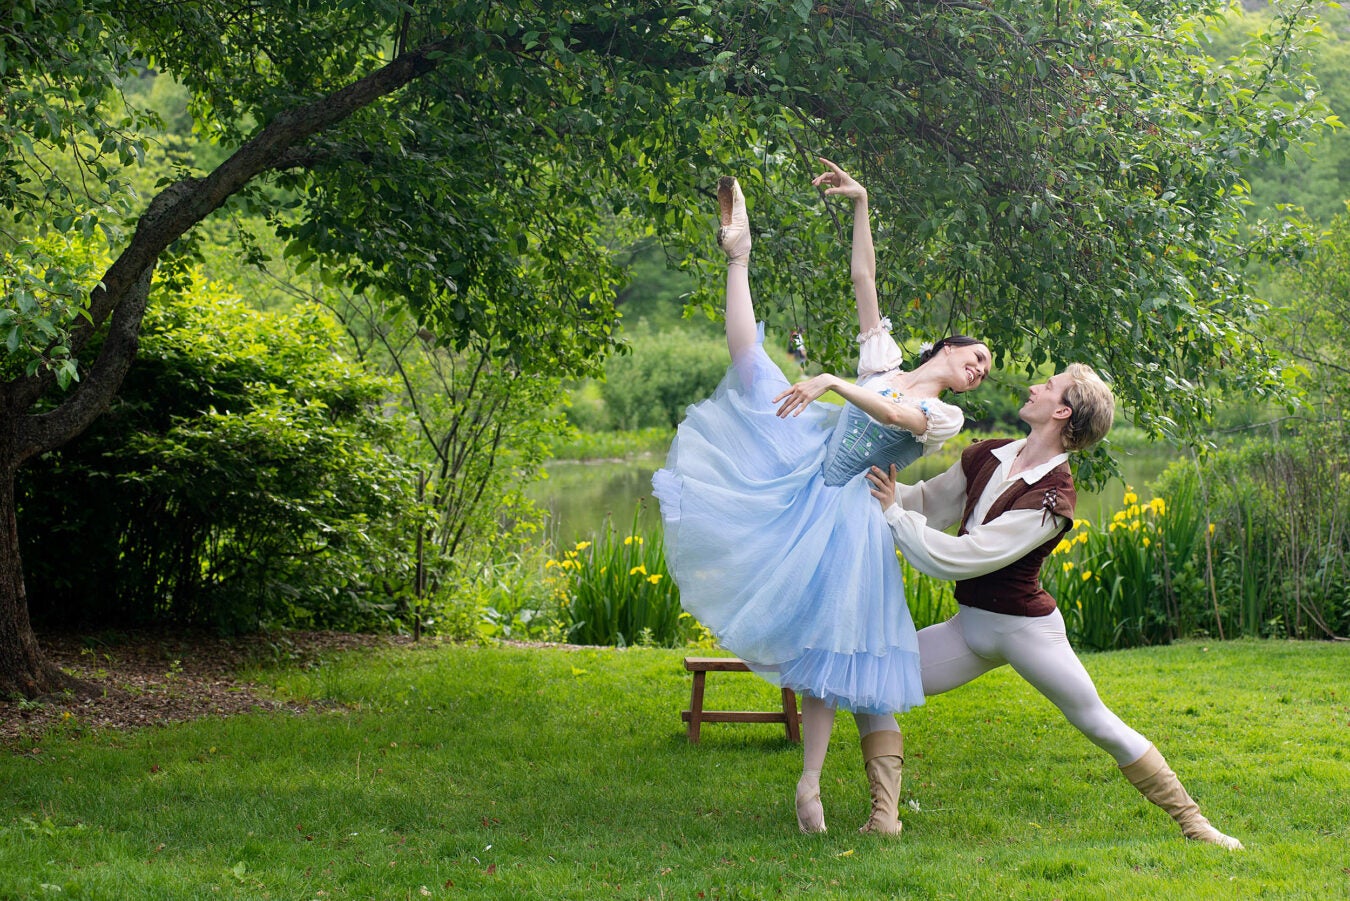 Two people doing ballet outside